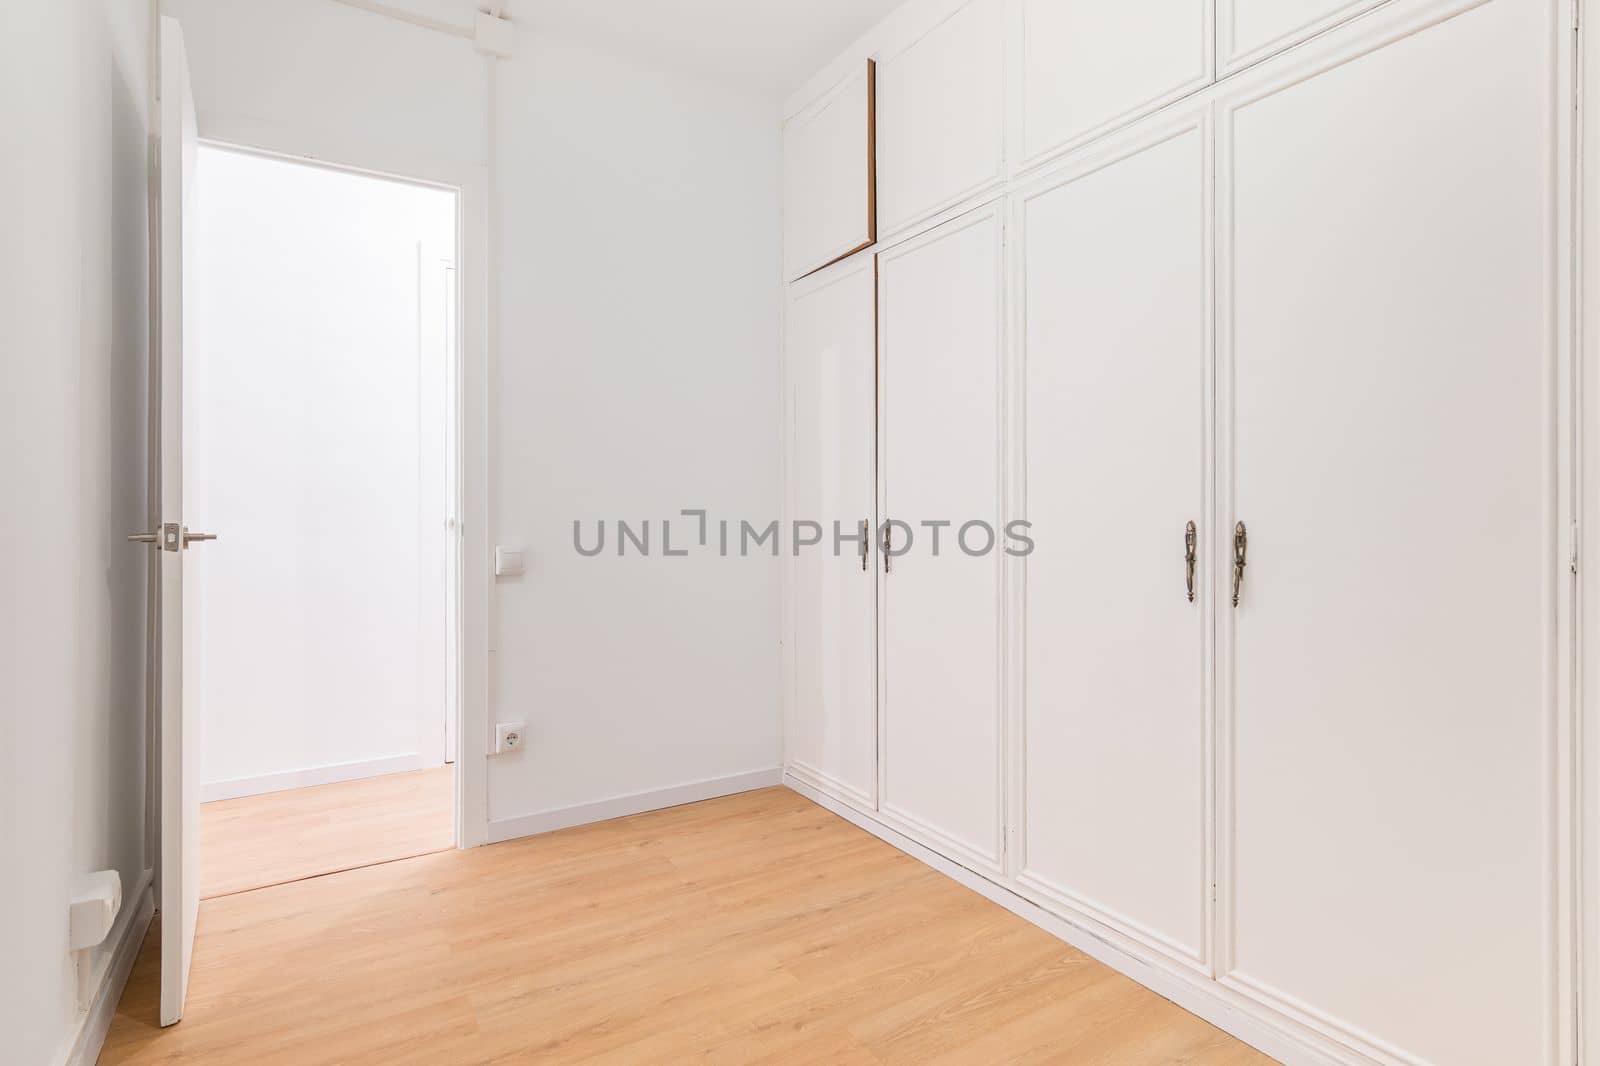 Built-in spacious wardrobes with white paneling and door open to another room with wooden laminate flooring. Concept of organizing storage and laconic interior by apavlin